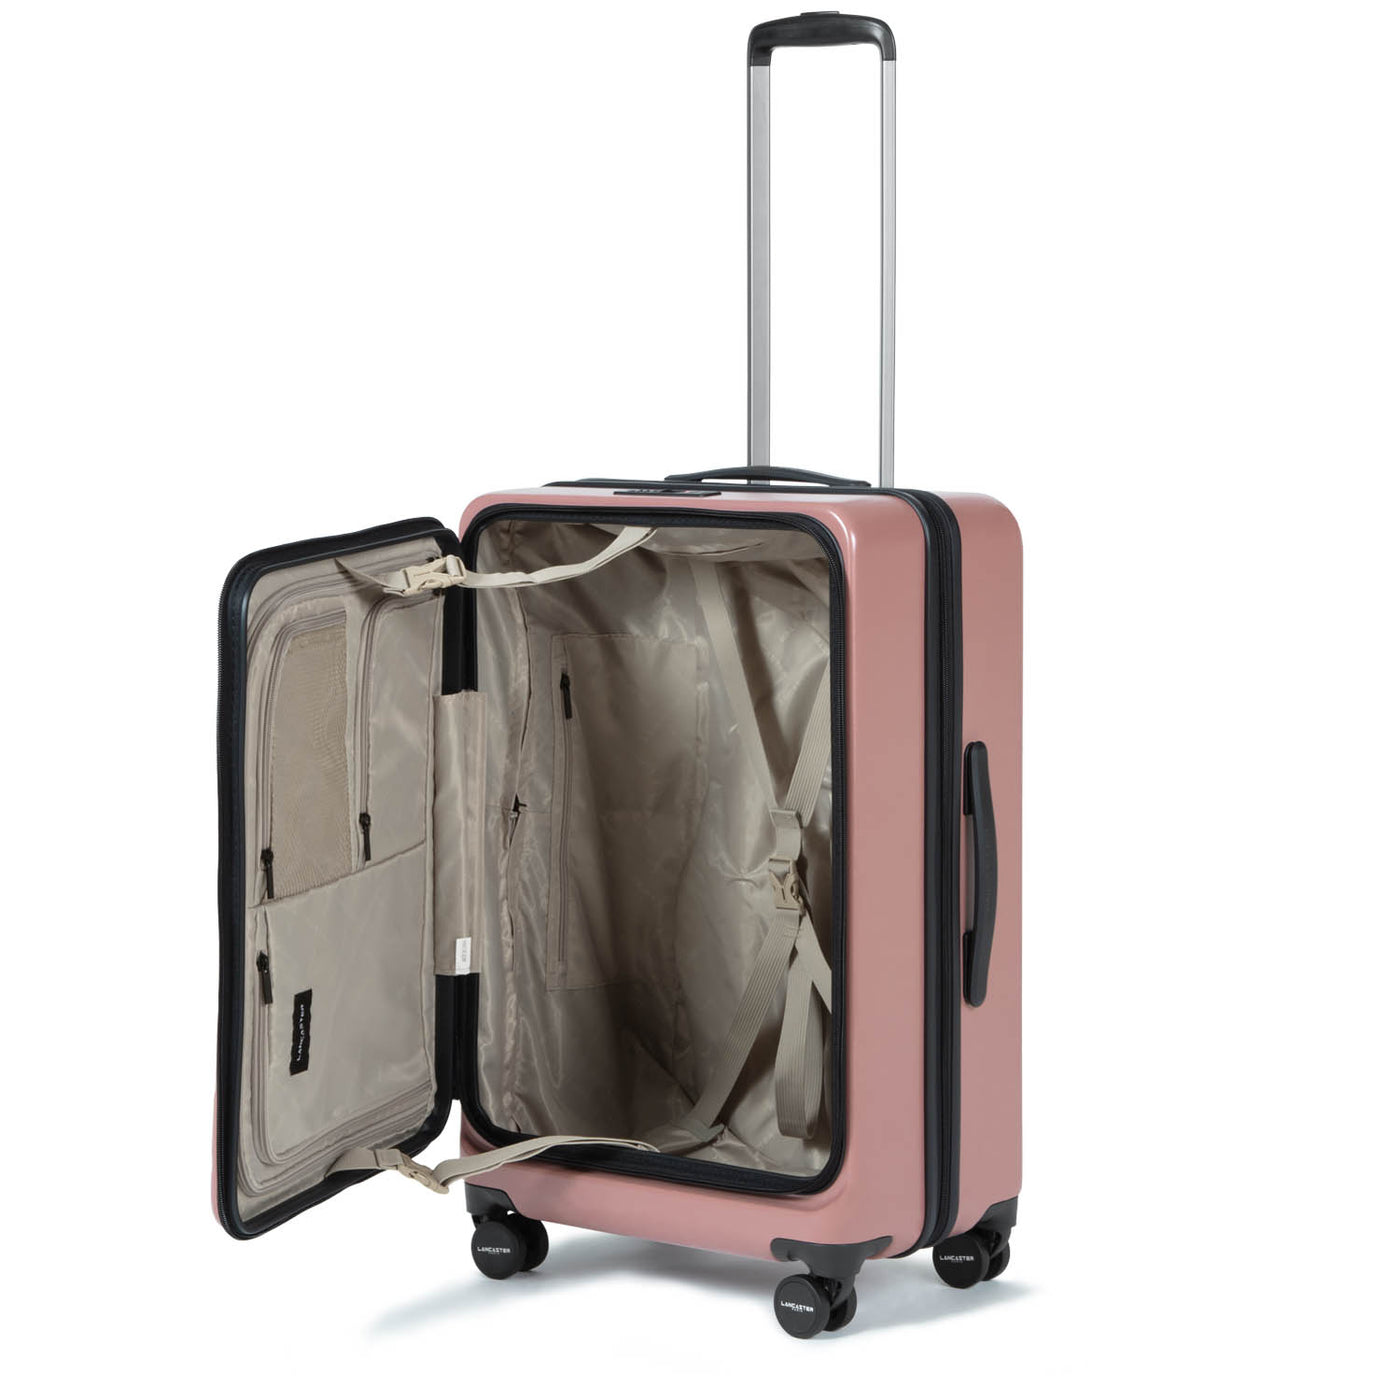 assortment of 3 luggage - luggage #couleur_rose-antic